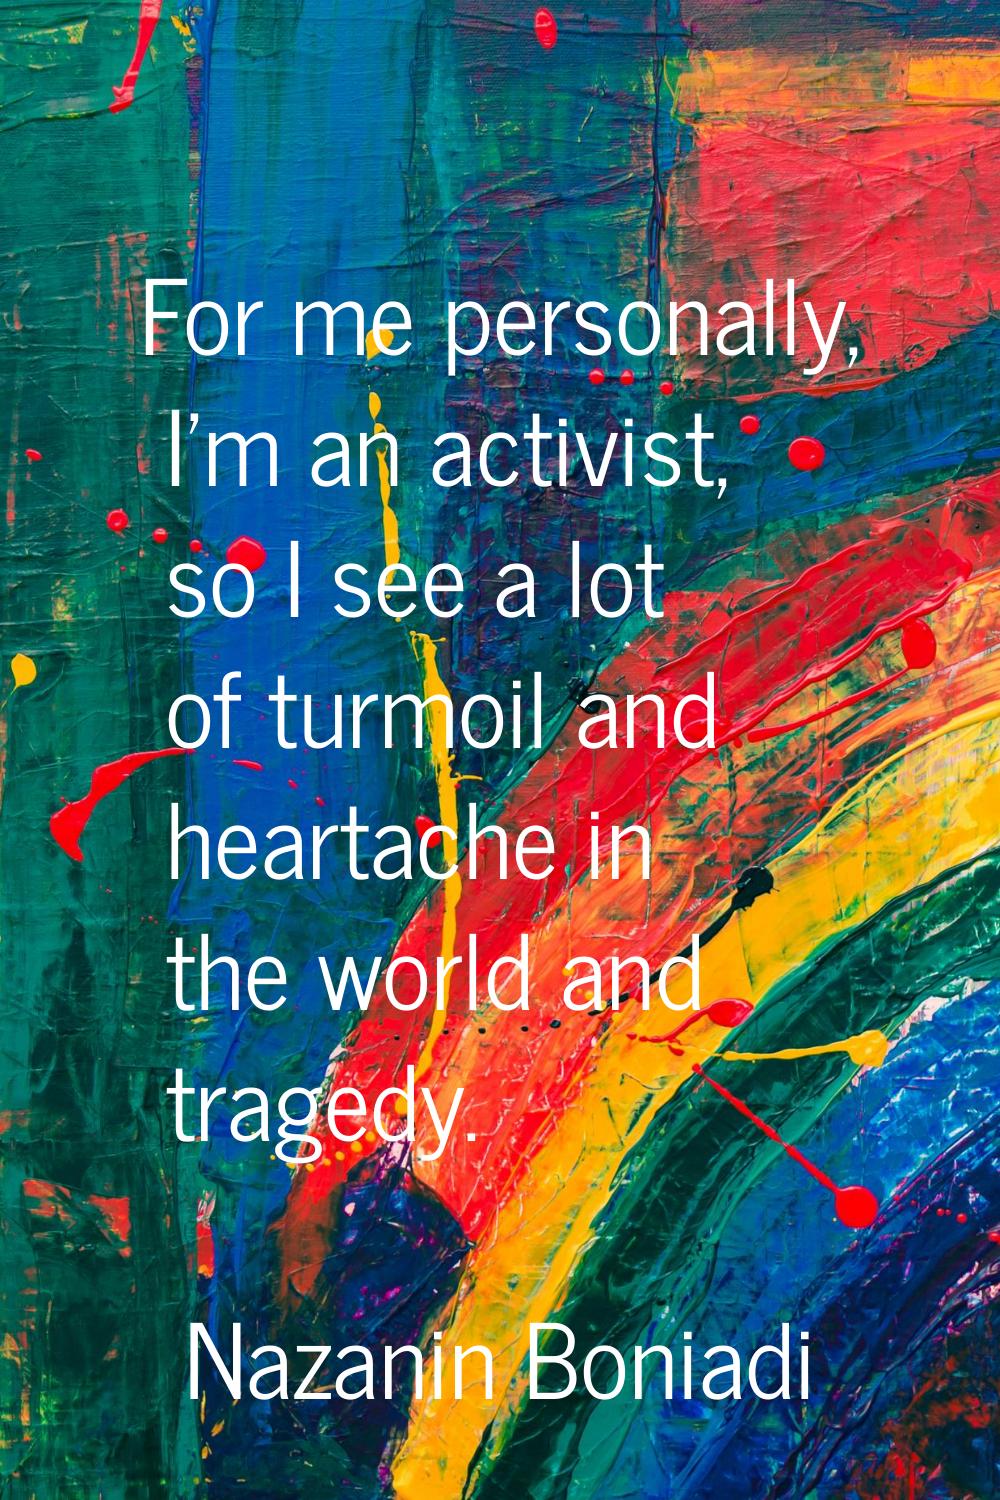 For me personally, I'm an activist, so I see a lot of turmoil and heartache in the world and traged